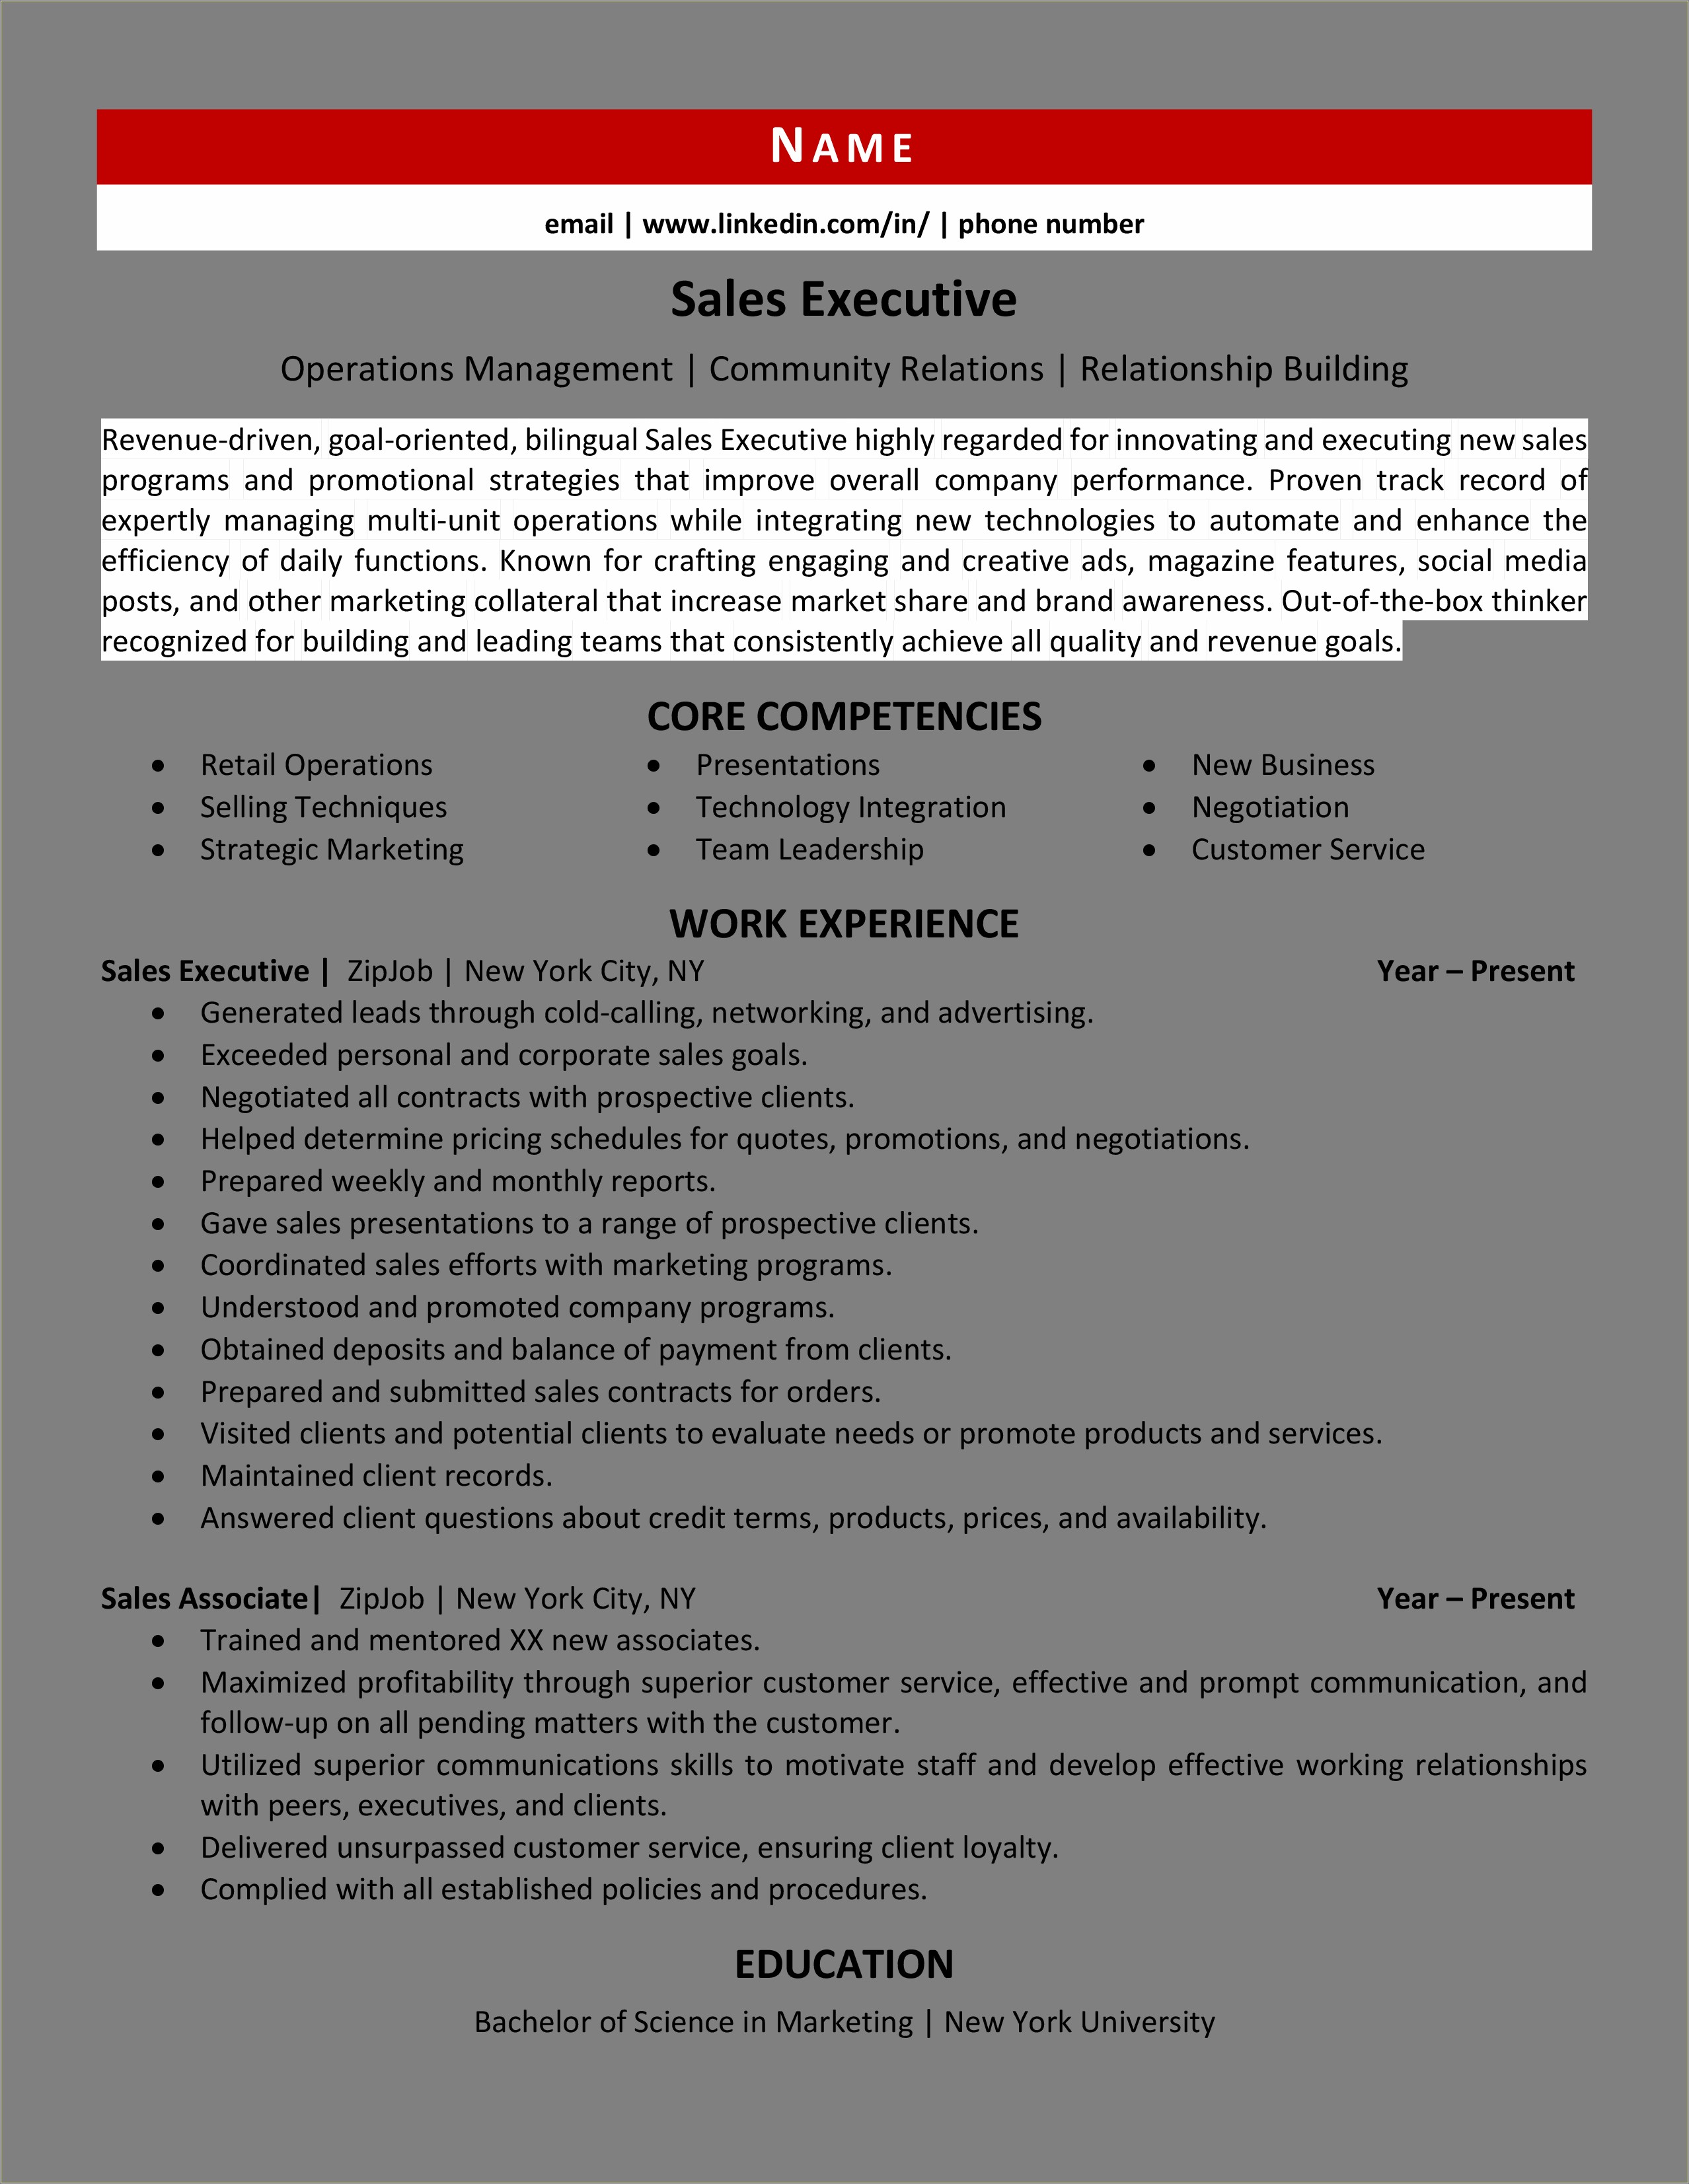 Sales Skills And Abilities On Resume